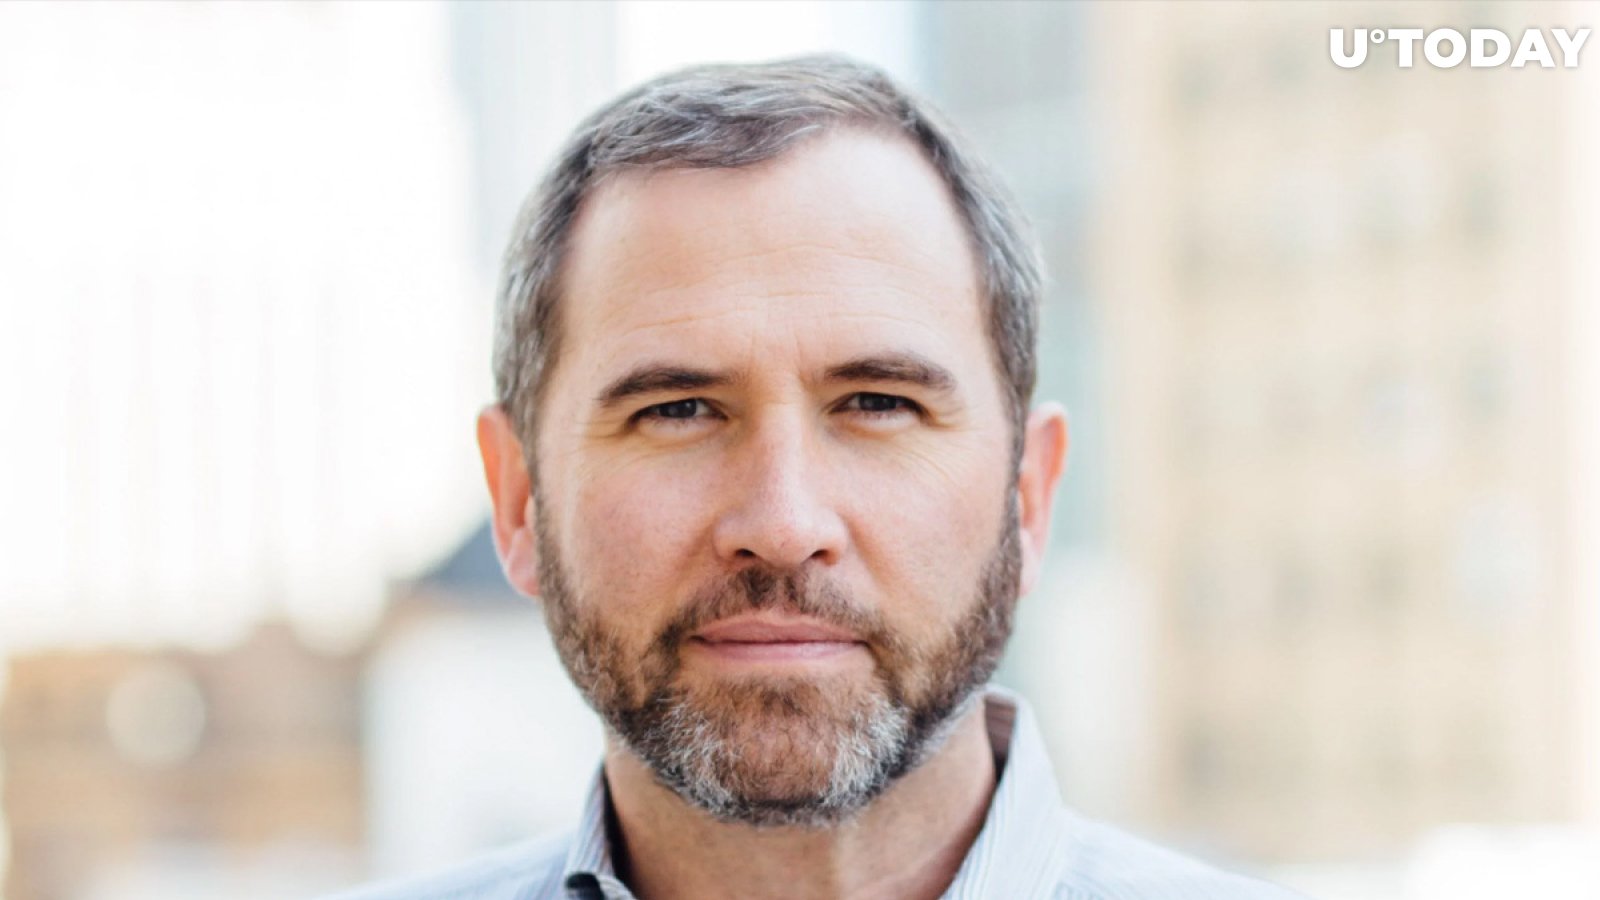 Ripple CEO on Burning XRP Escrow: “I Don’t Rule Anything Out”